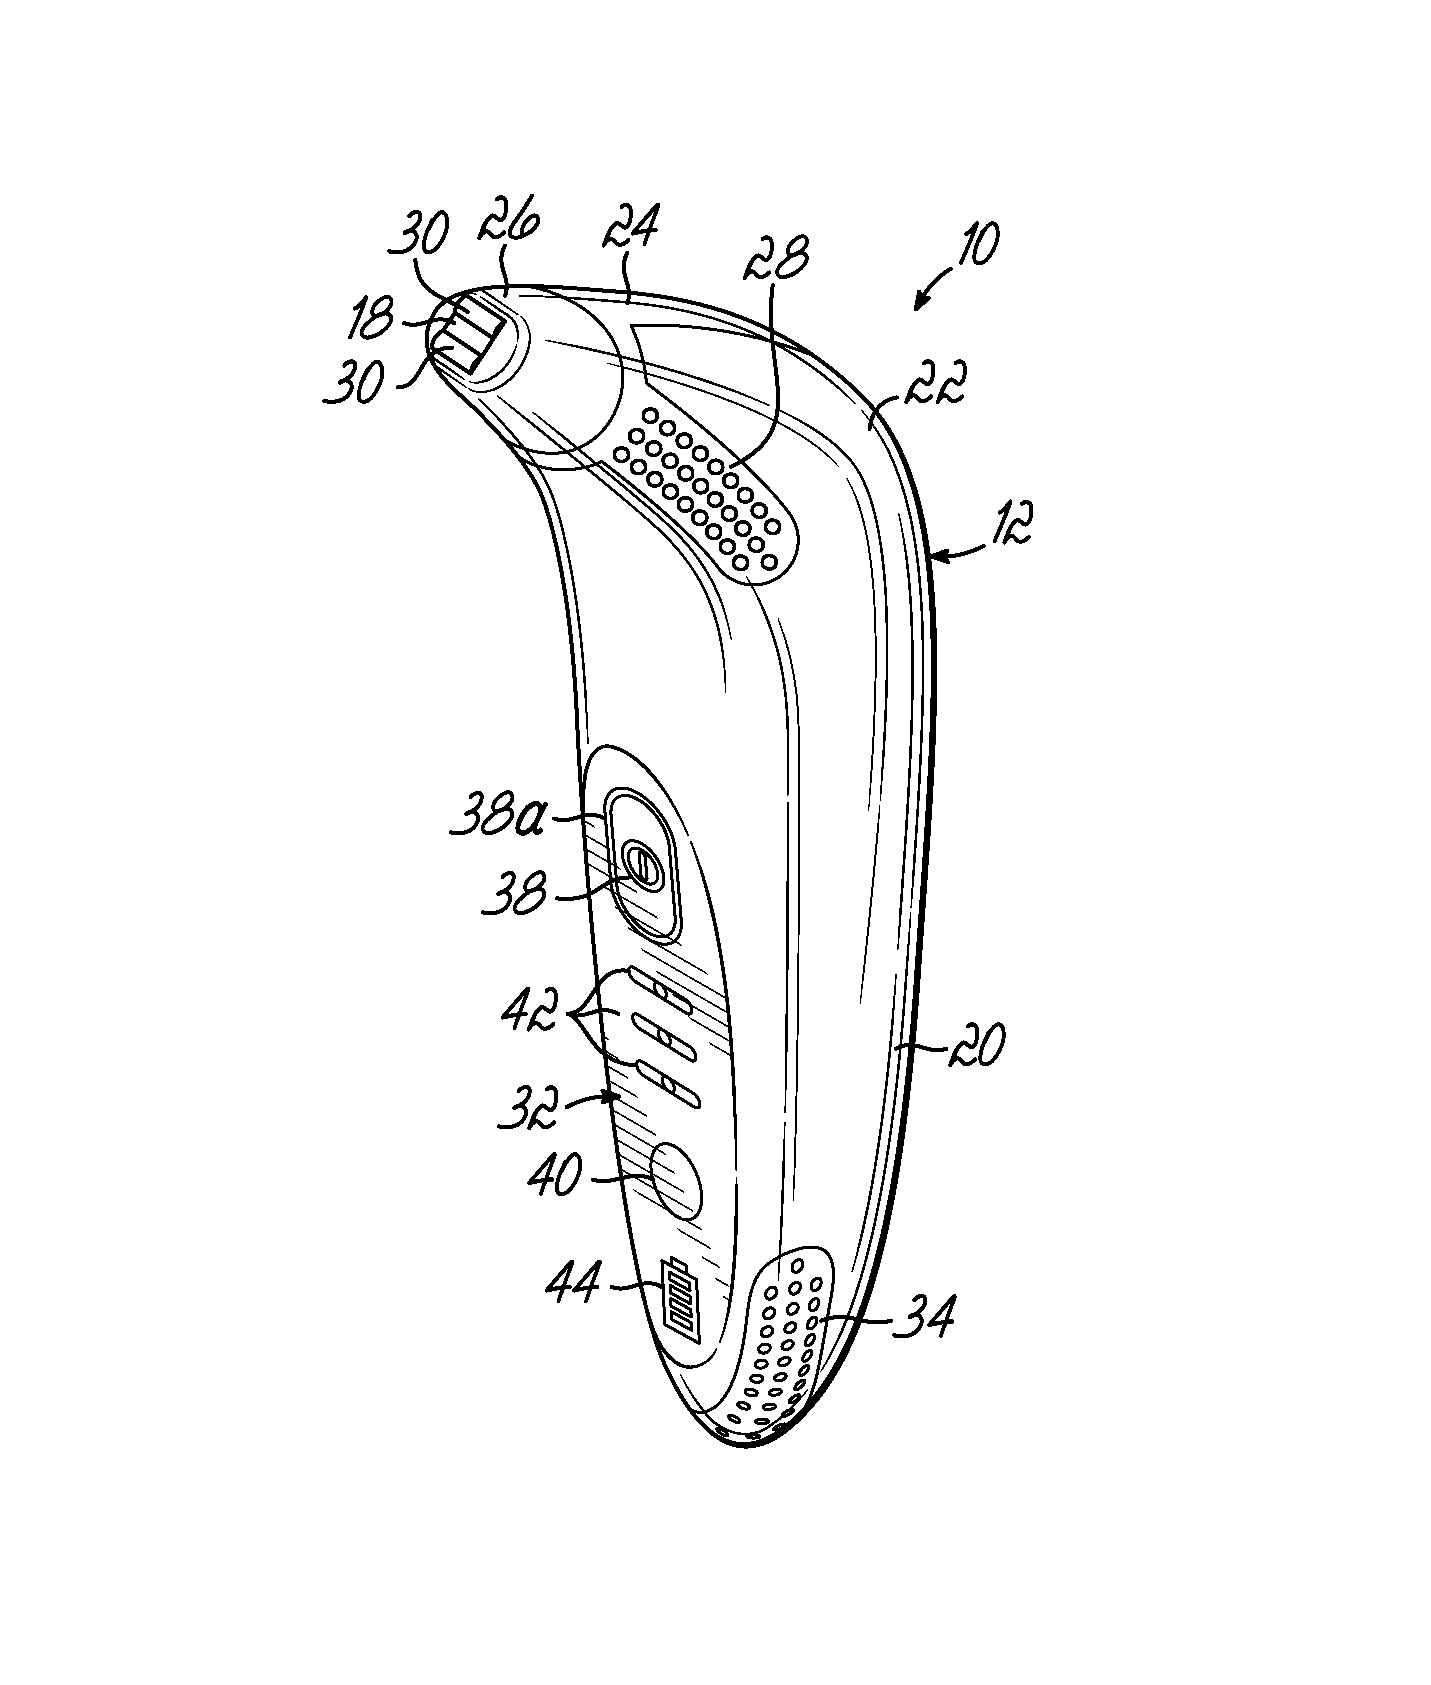 Handheld apparatus for use by a non-physician consumer to fractionally resurface the skin of the consumer